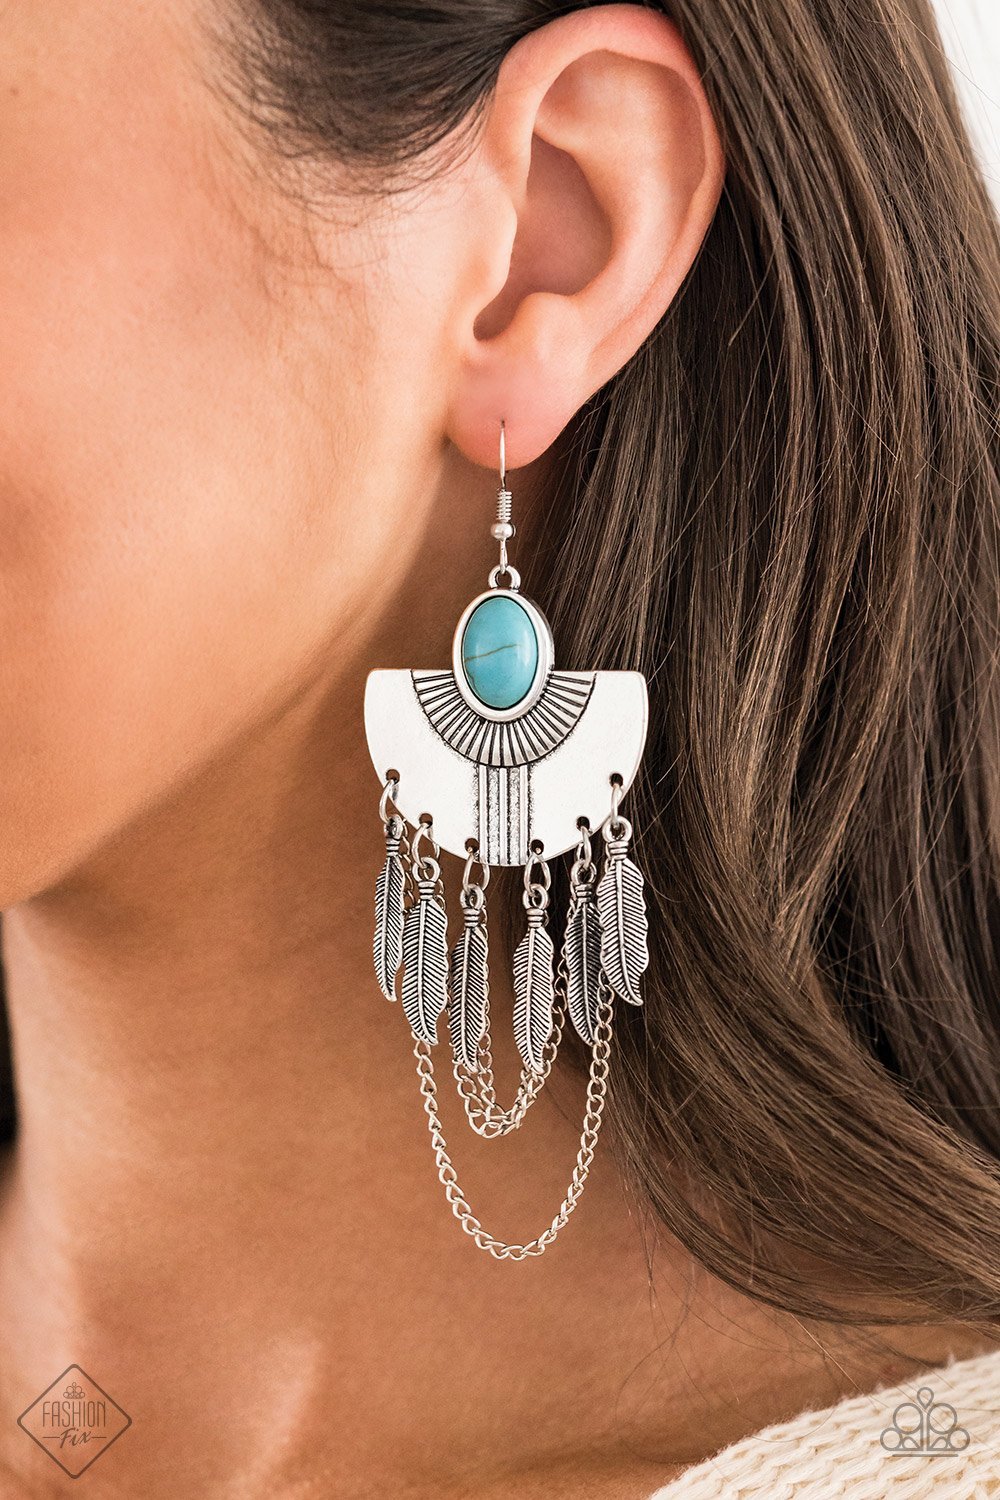 Sure Thing, Chief - Blue Earrings